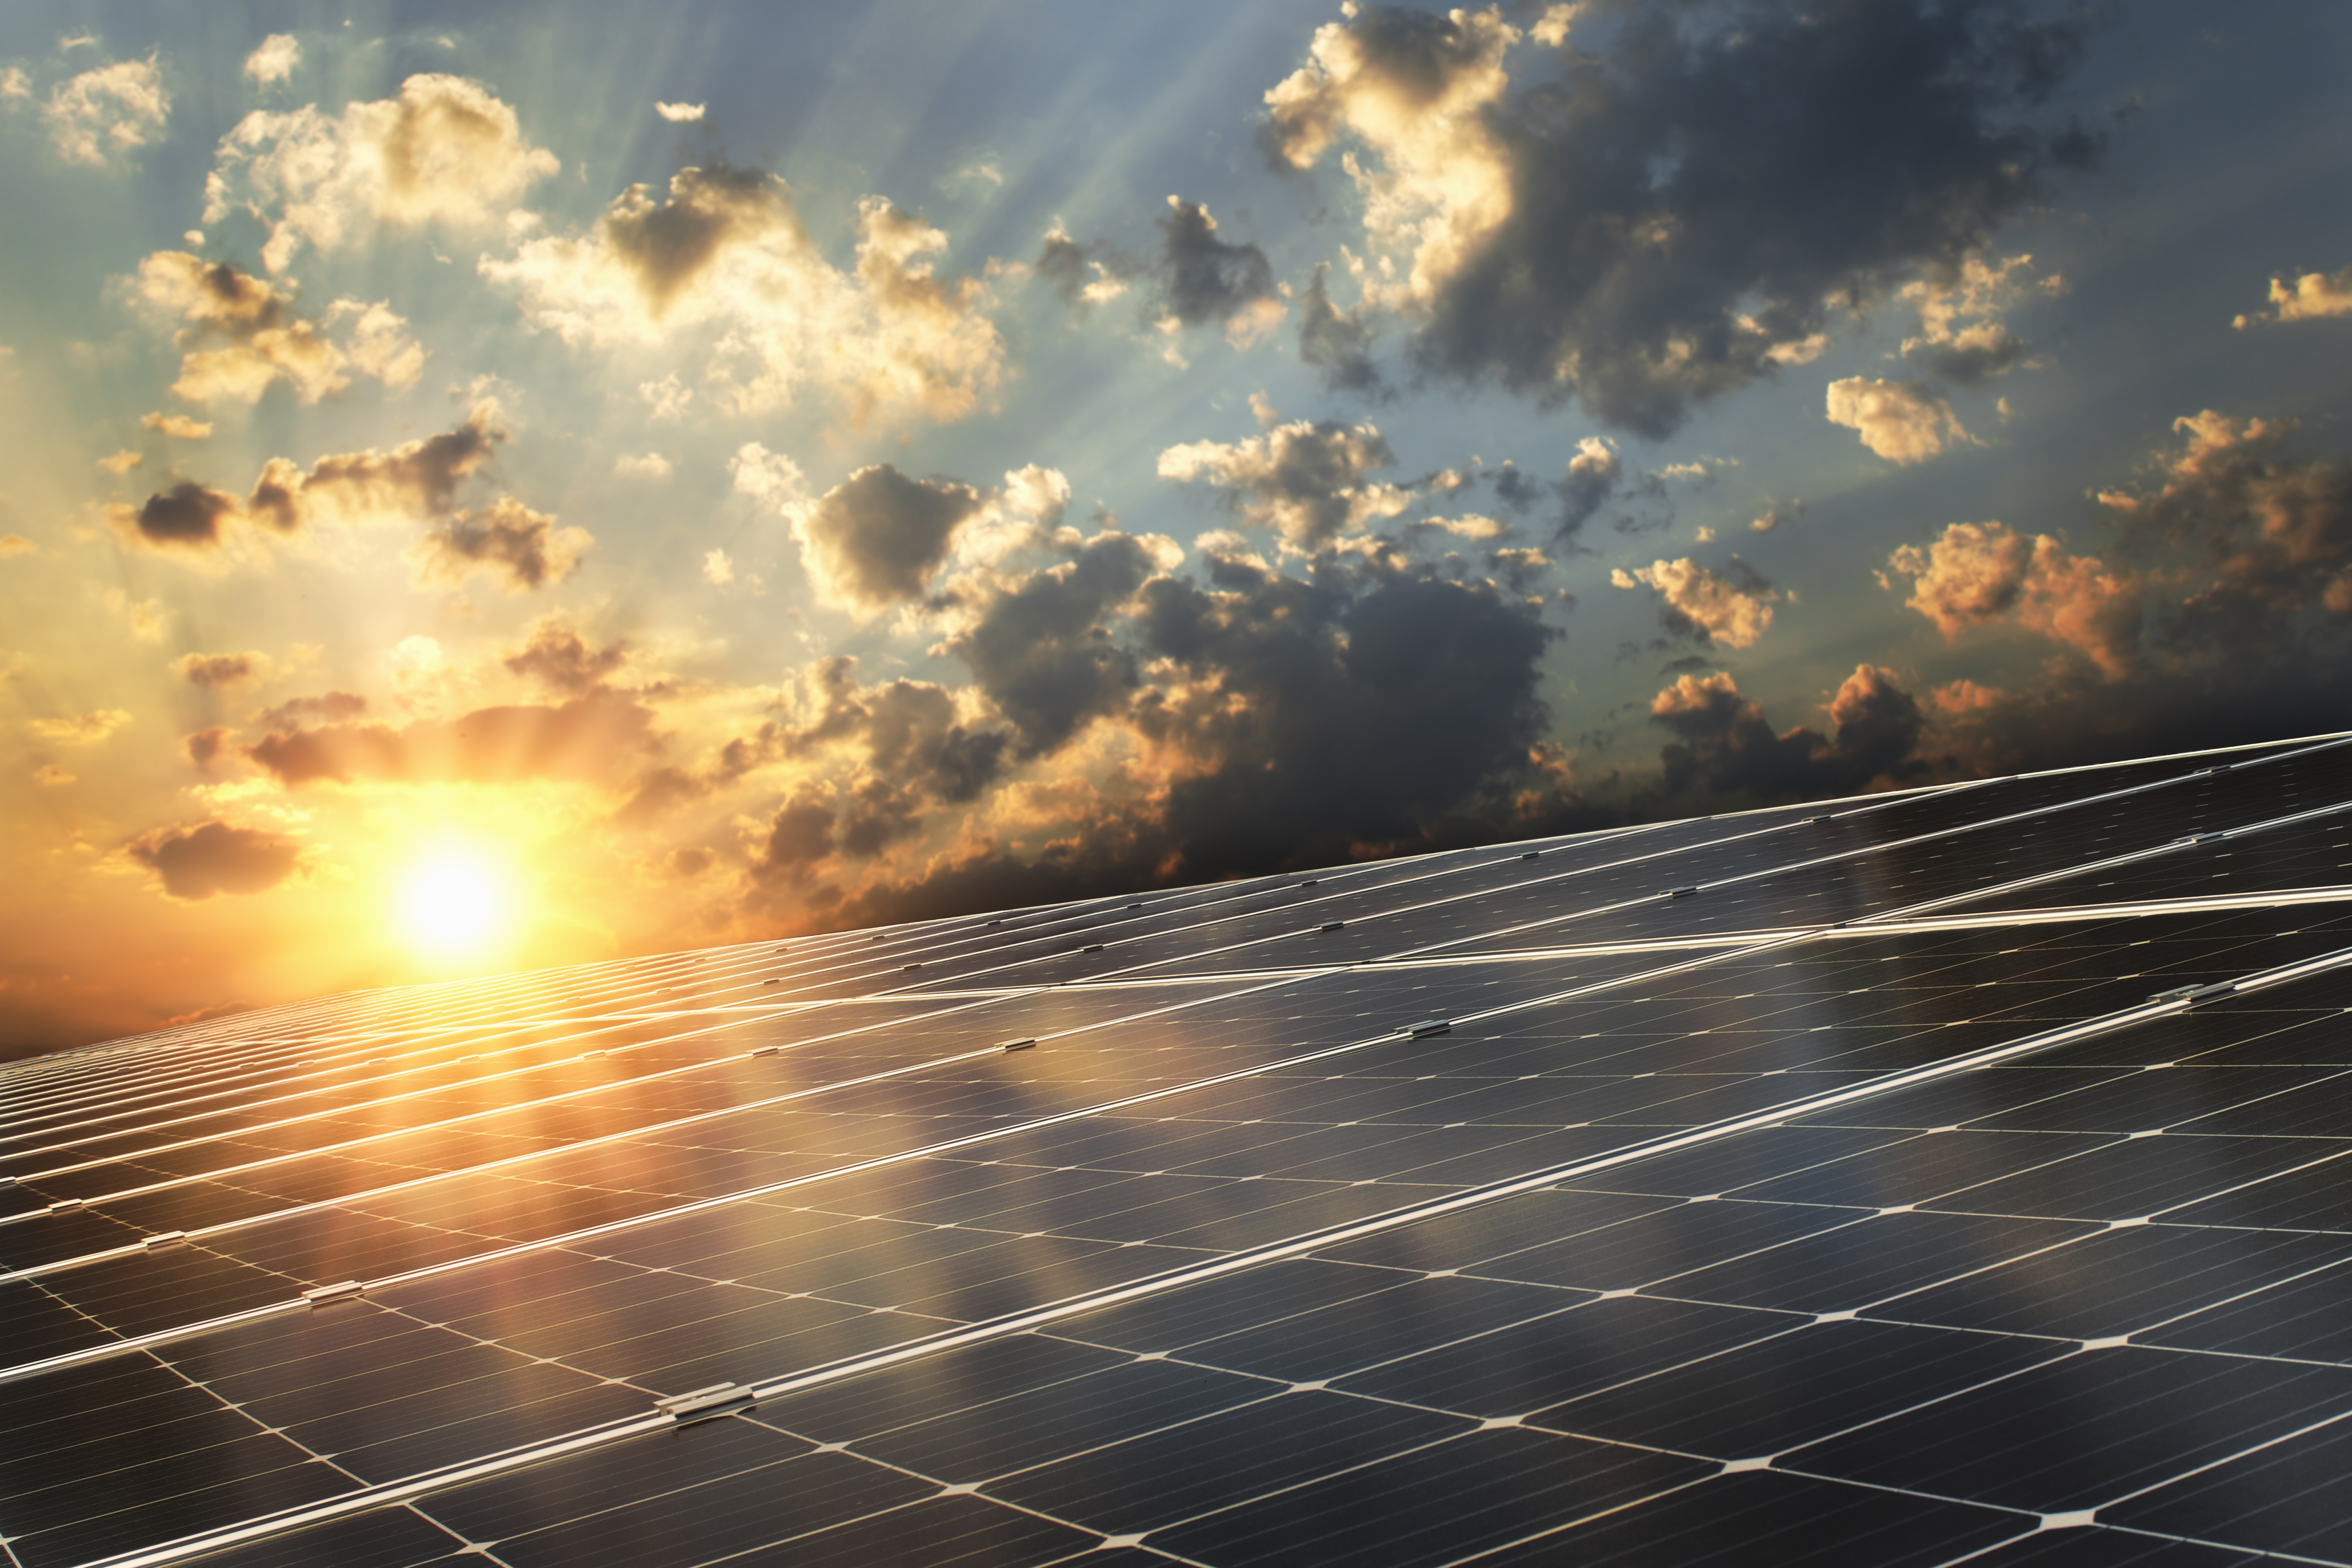 Soltech initiates process to identify investors for solar park portfolio of more than 1,000 MWp